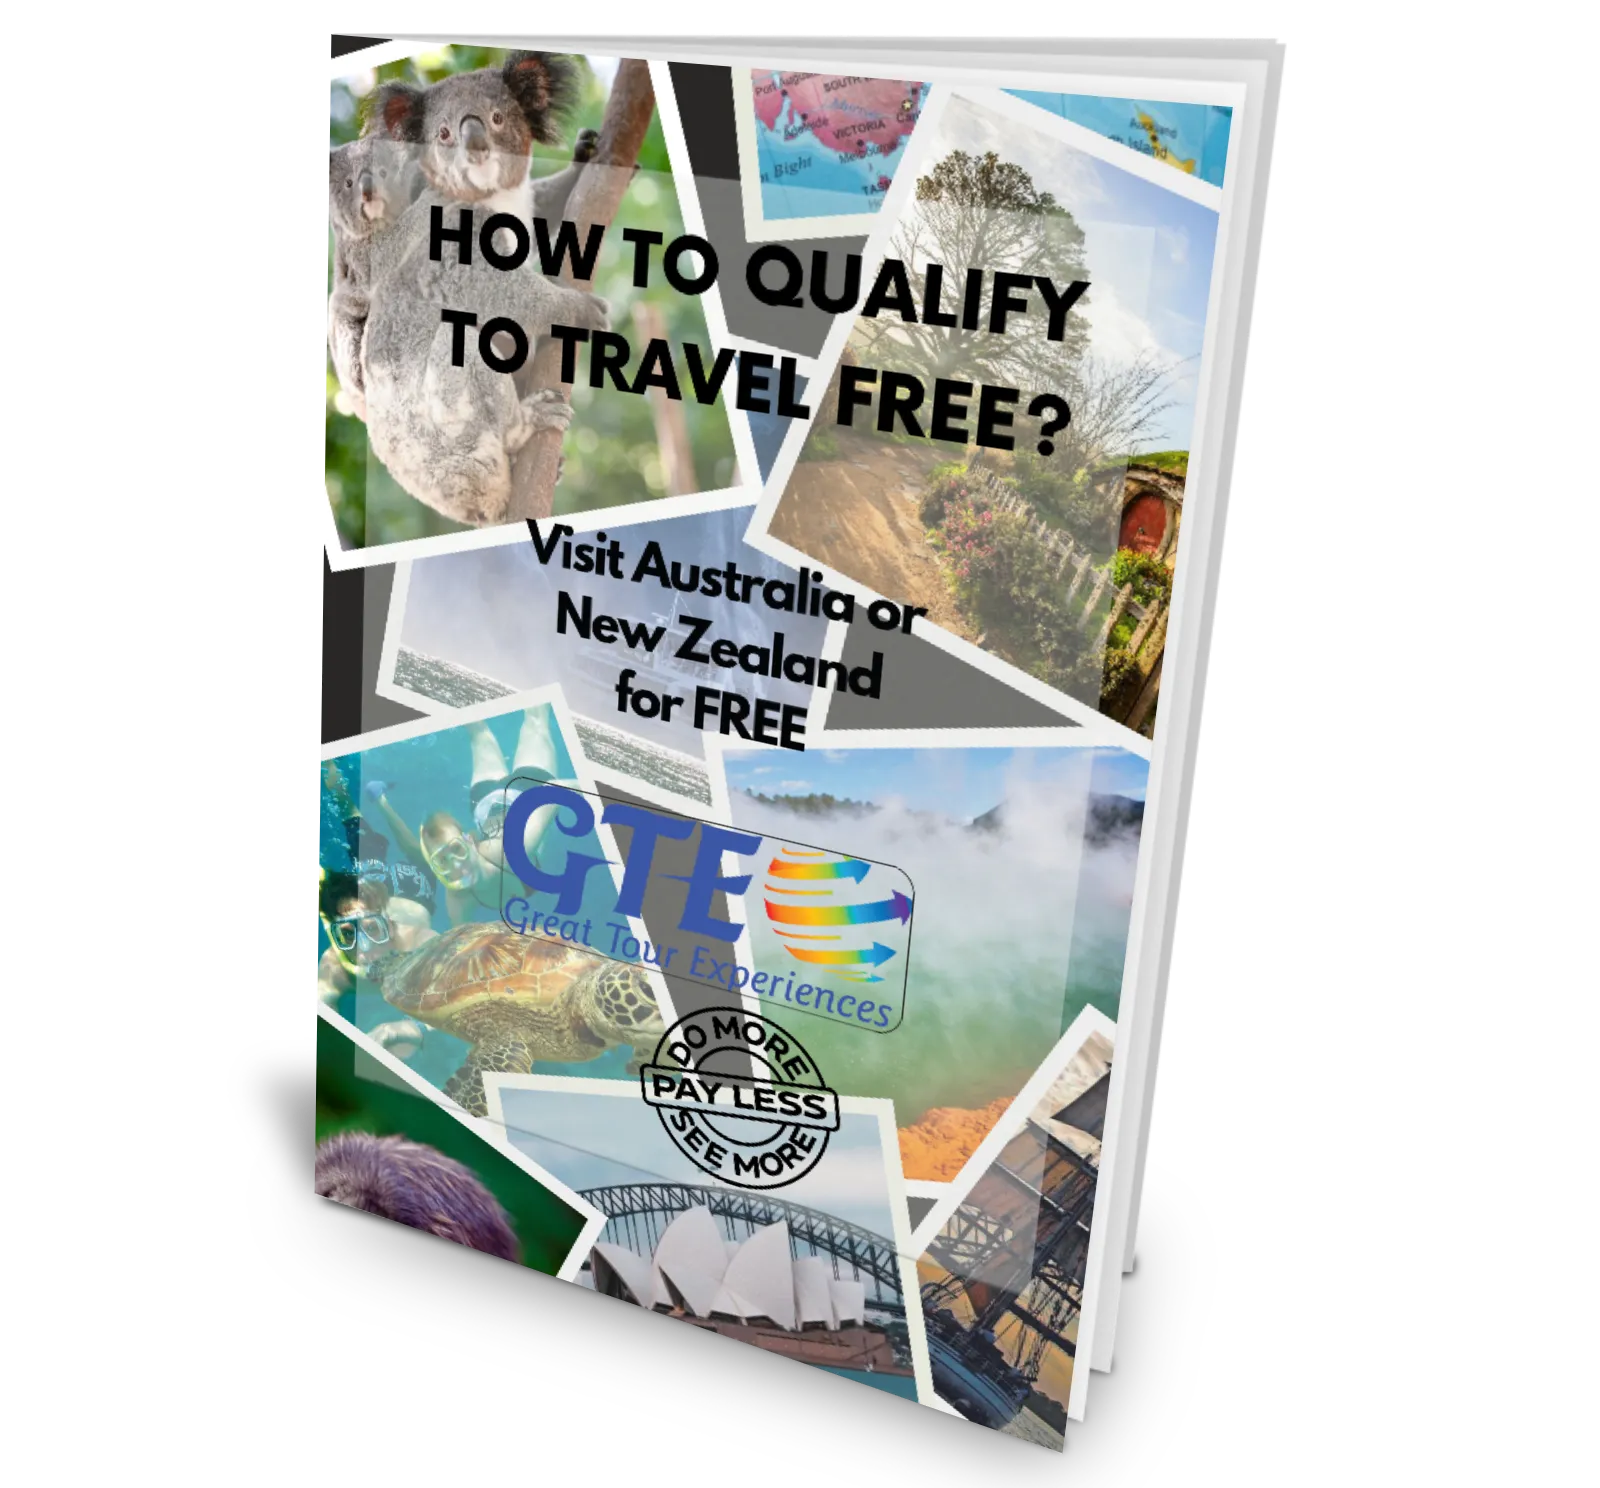 How To Qualify to travel for FREE